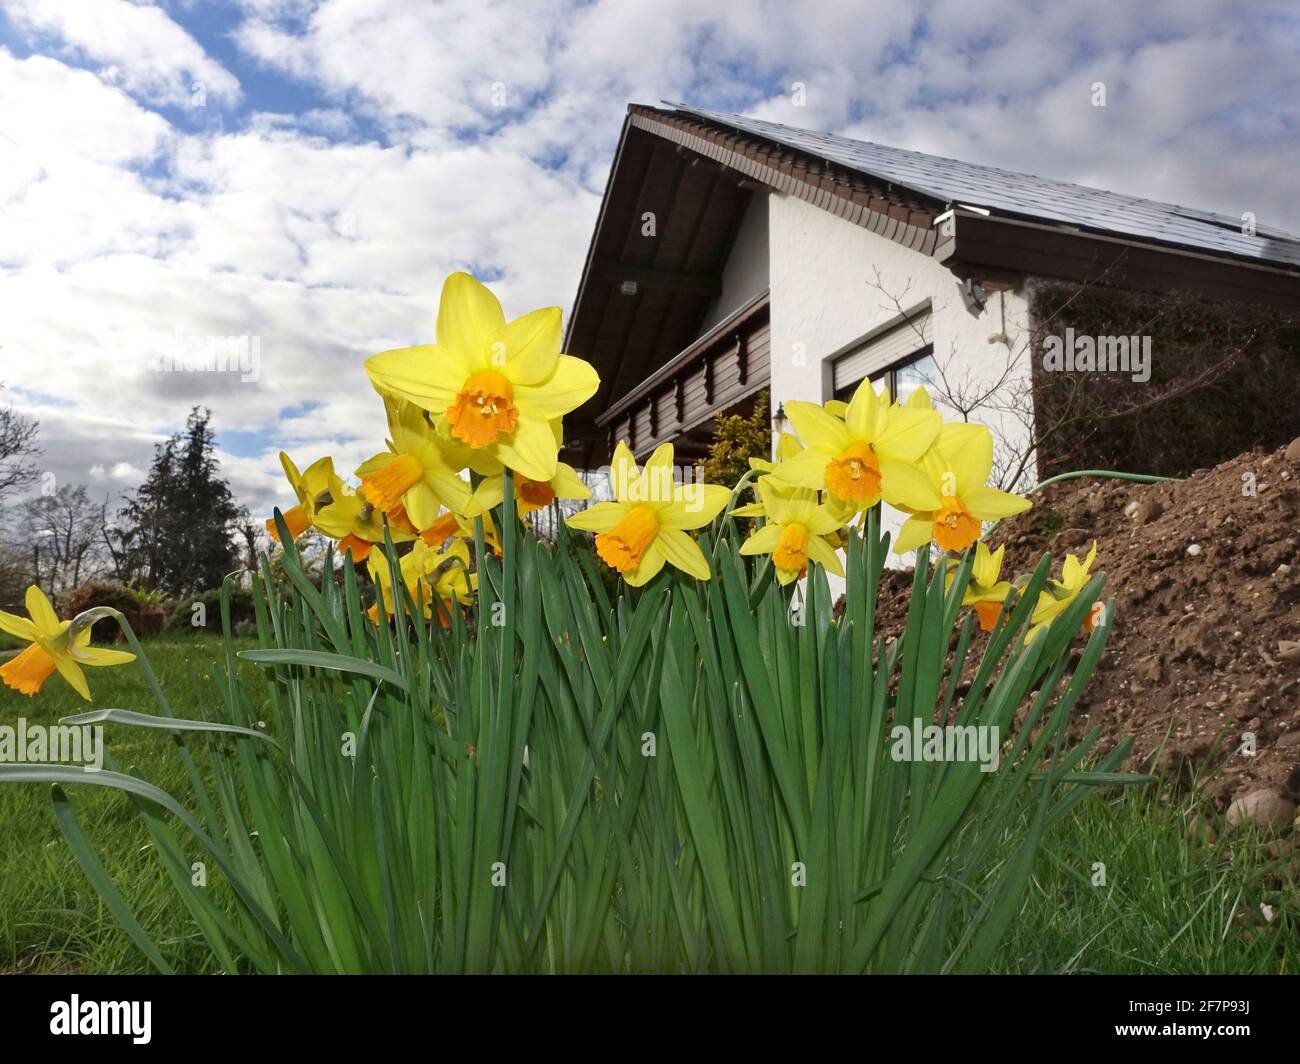 daffodil (Narcissus spec.), daffodils in the garden of a single-family home, Germany Stock Photo